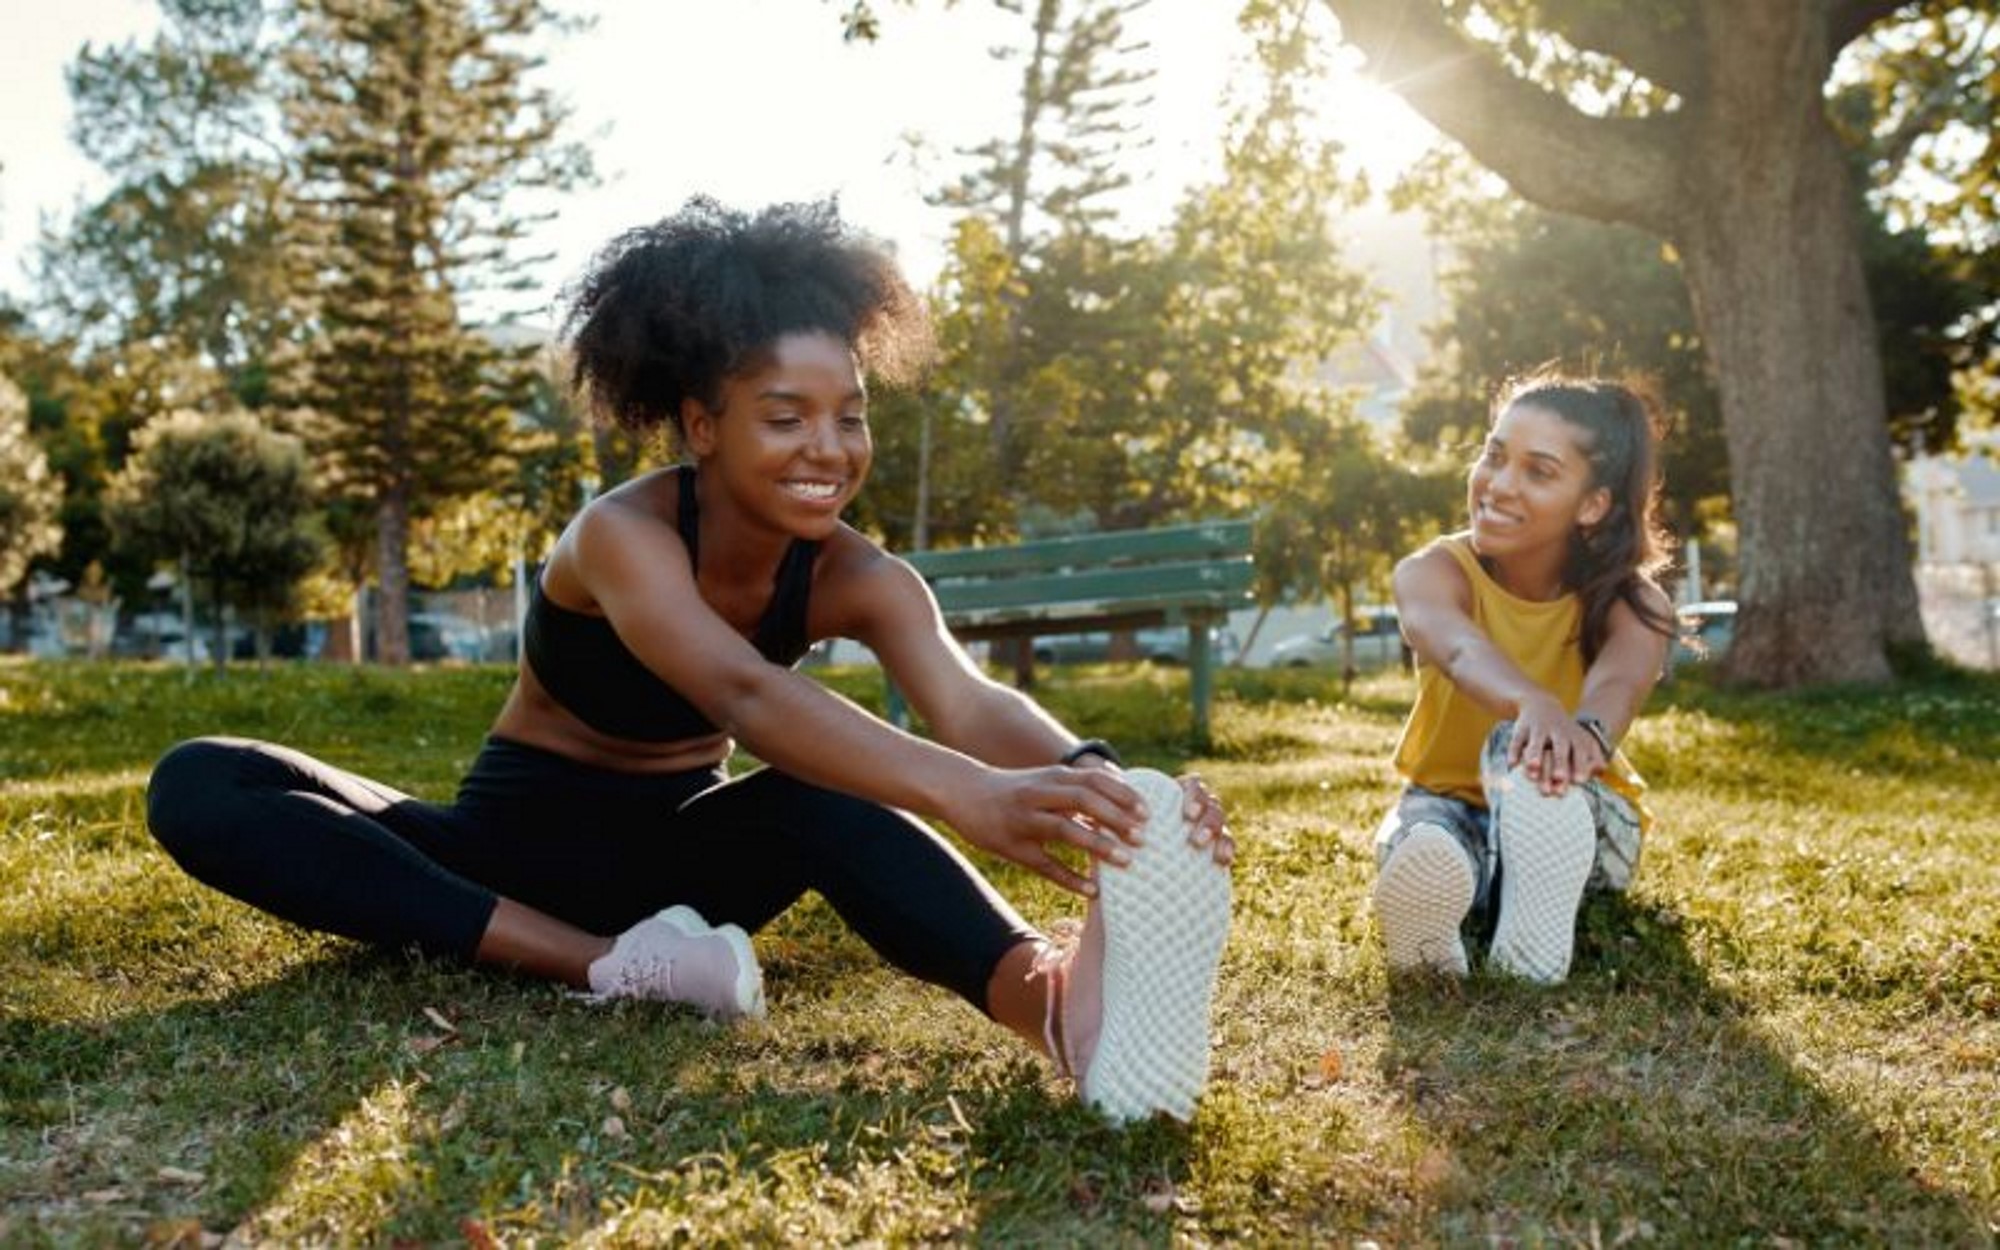 2 women warming up and stretching at a park